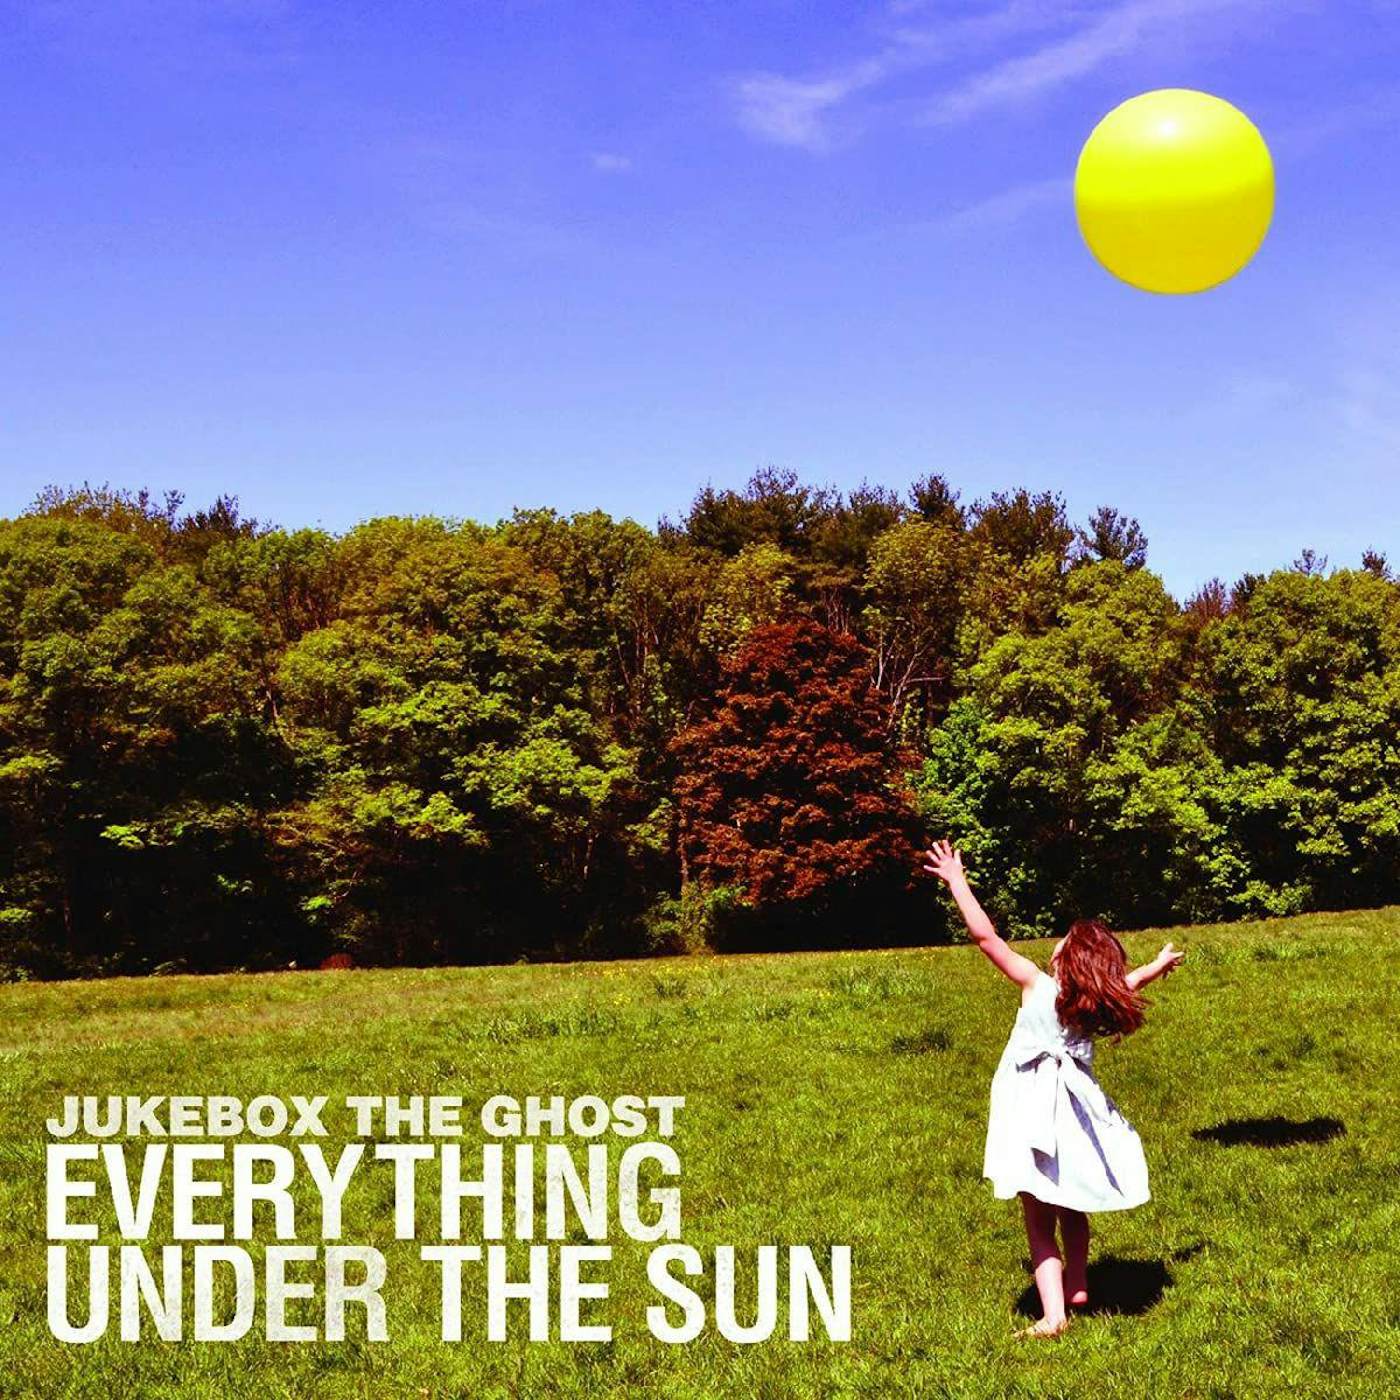 Jukebox The Ghost EVERYTHING UNDER THE SUN (10TH ANNIVERSARY EDITION/YELLOW VINYL/DL CARD) Vinyl Record